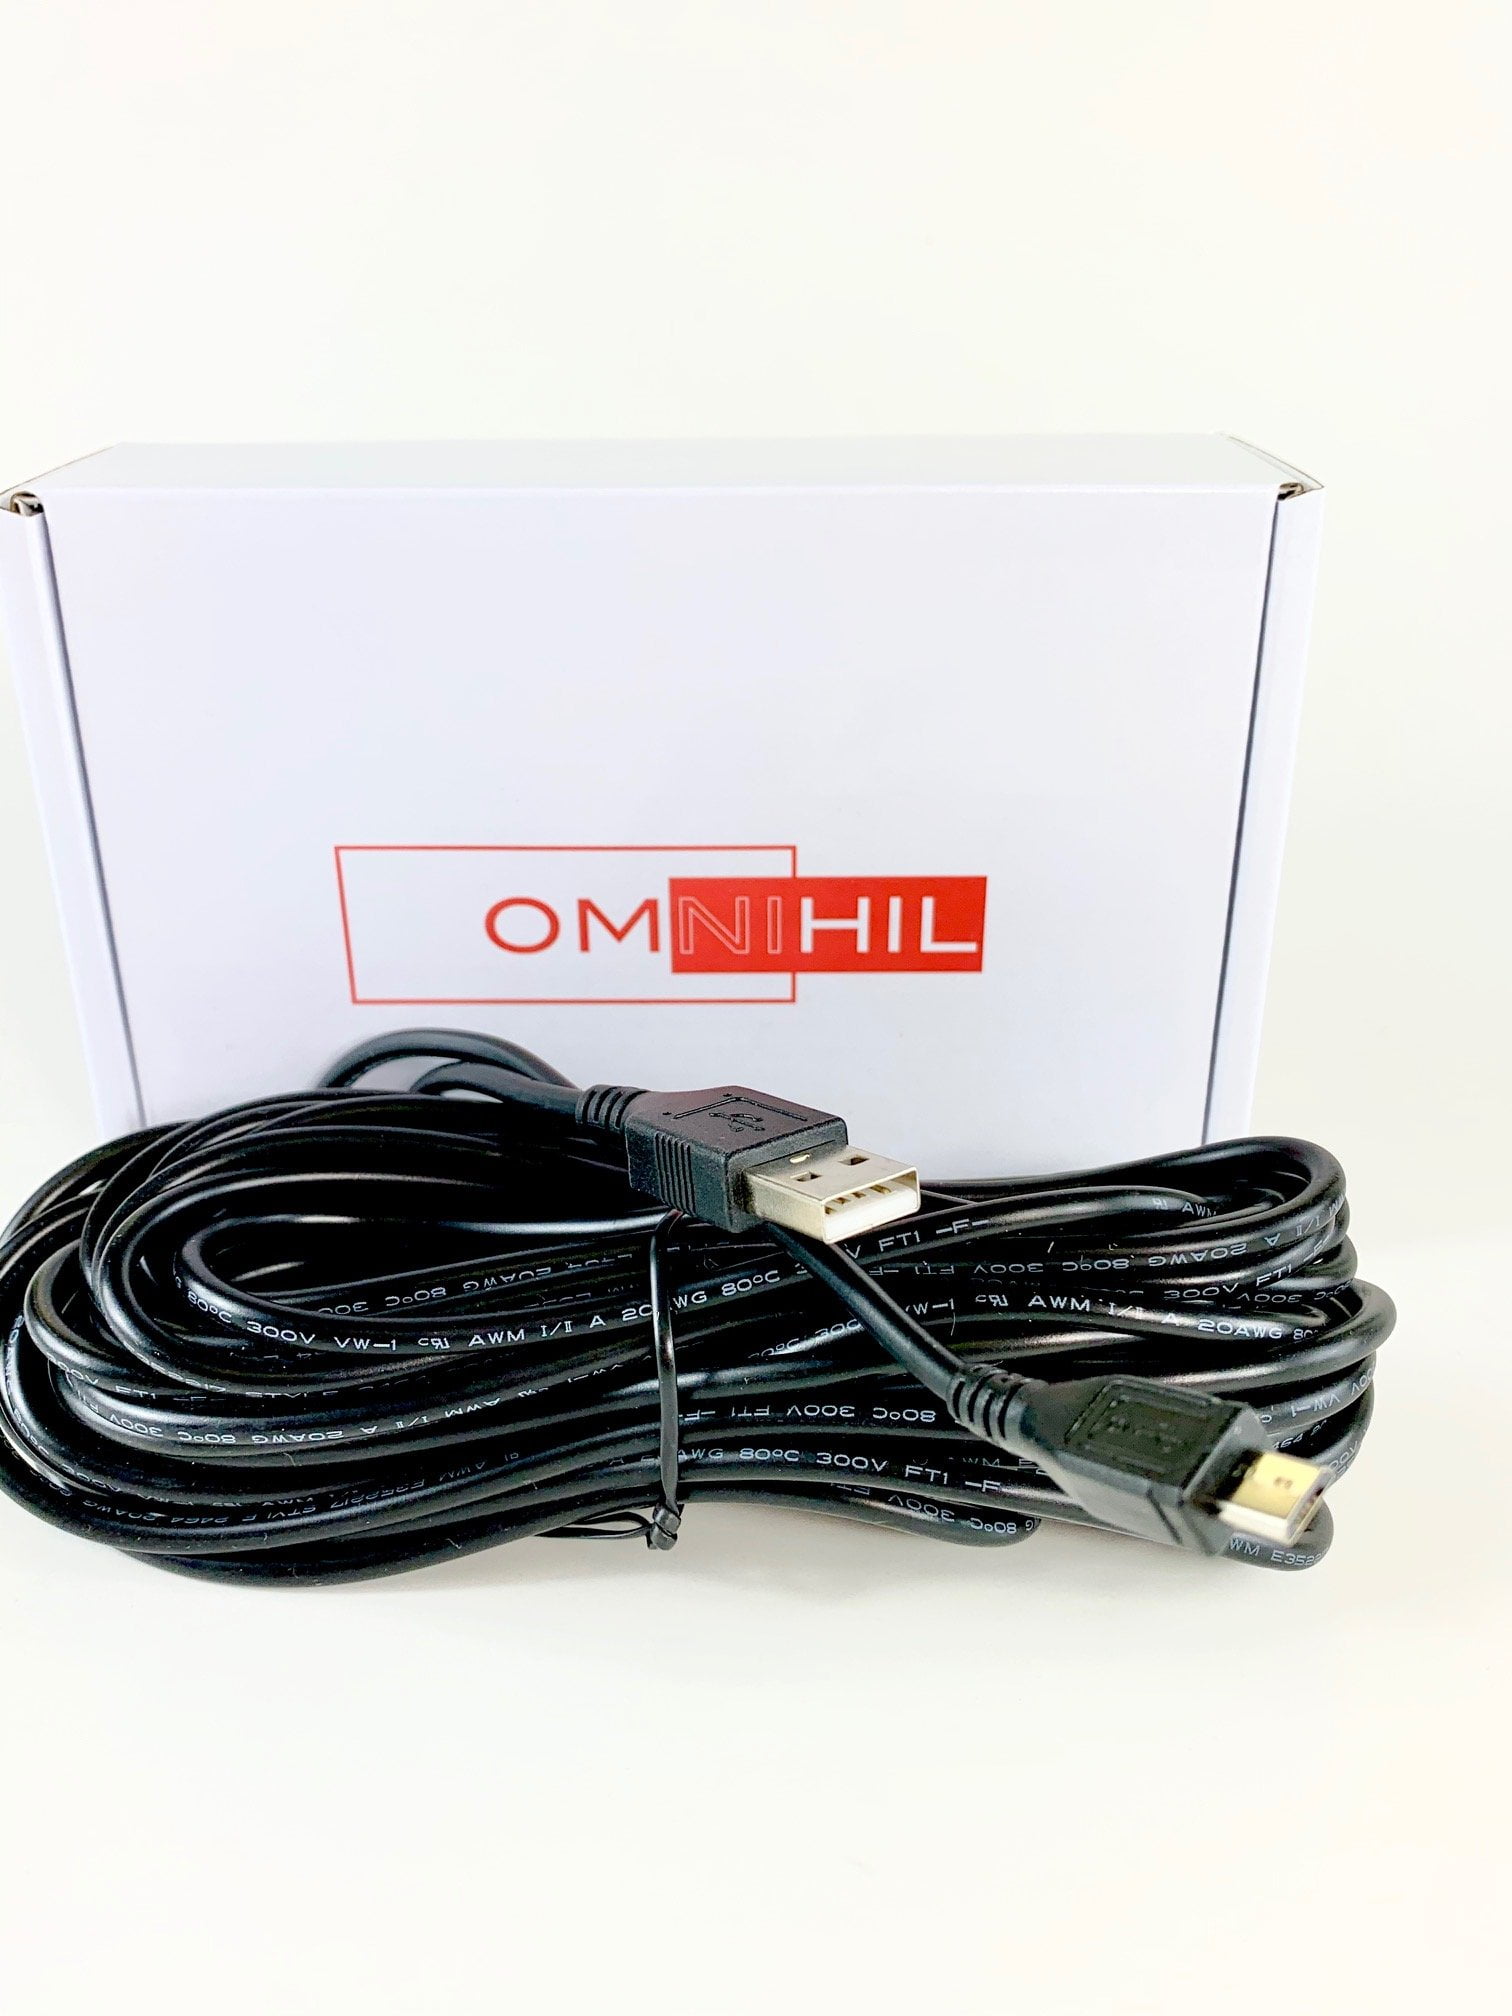 Spot Thermal Camera OMNIHIL 5 Feet Long High Speed USB 2.0 Cable Compatible with FLIR TG165 